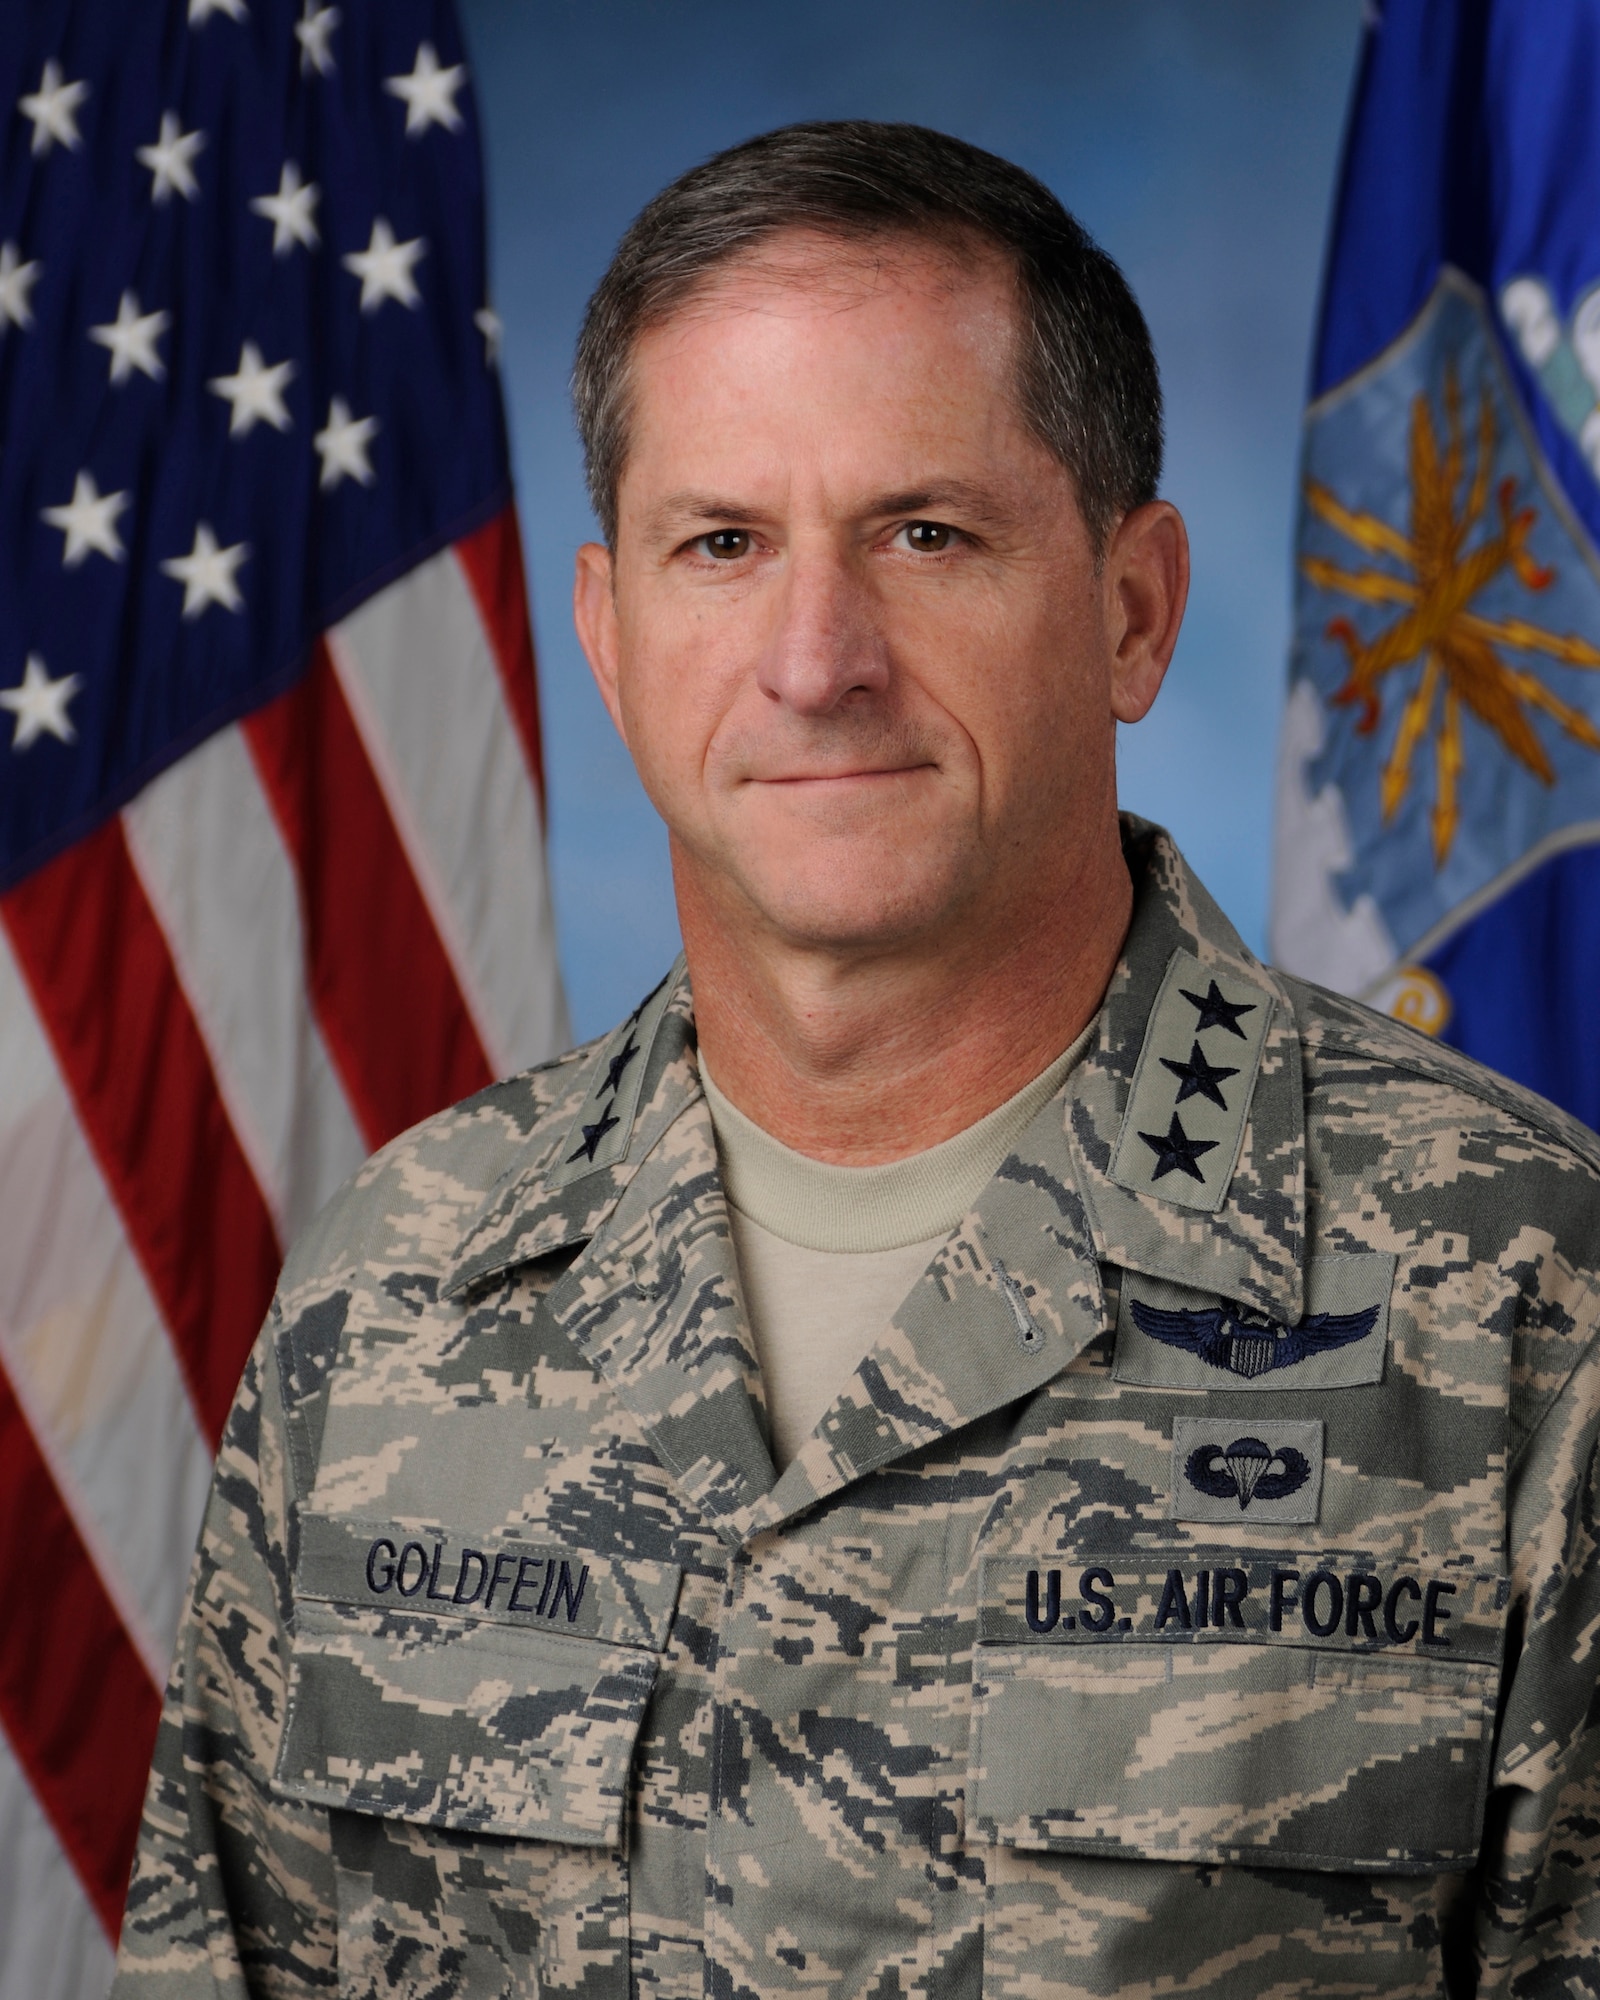 Lt. Gen. David L. Goldfein is Commander, U.S. Air Forces Central, Southwest Asia. As the Air Component Commander for U.S. Central Command, the general is responsible for developing contingency plans and conducting air operations in a 20-nation area of responsibility covering Central and Southwest Asia.

